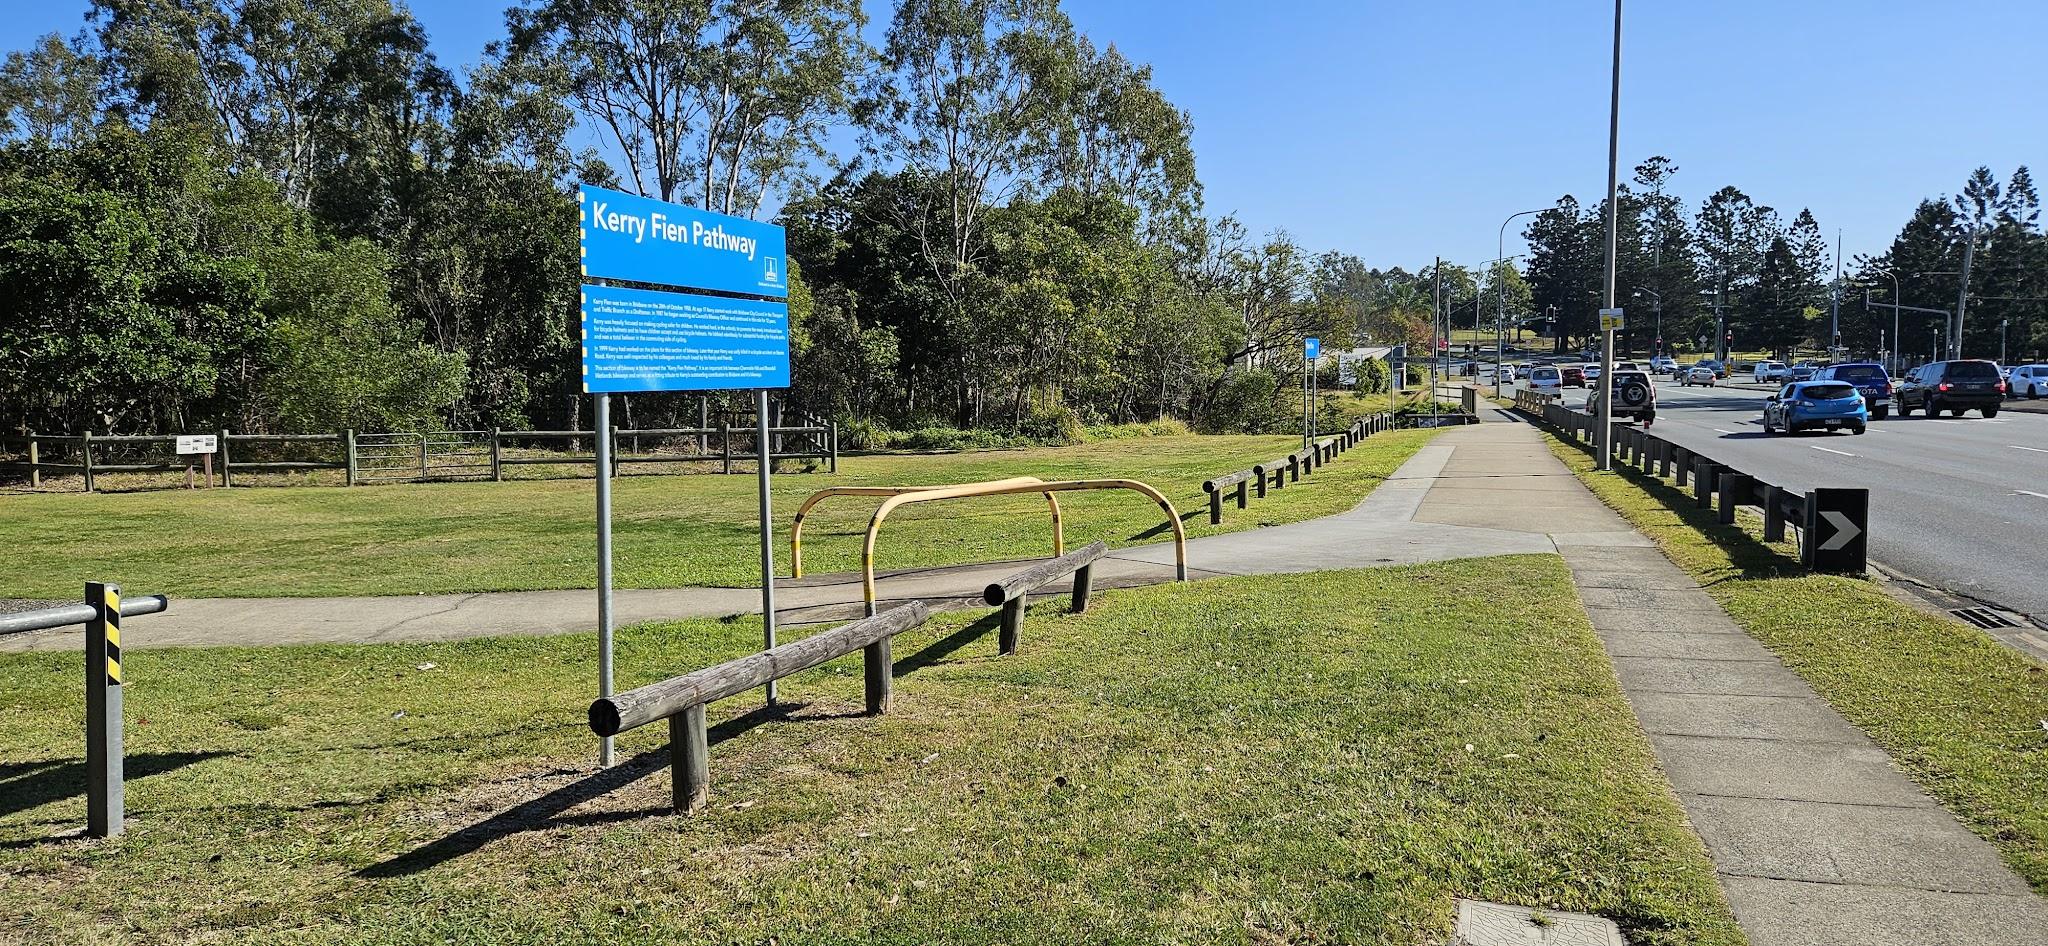 This shows the end of the Kerry Fien Pathway, where the Downfall Creek Bikeway stops at Gympie Road. Downfall Creek passes under the road next to the trees in the background.